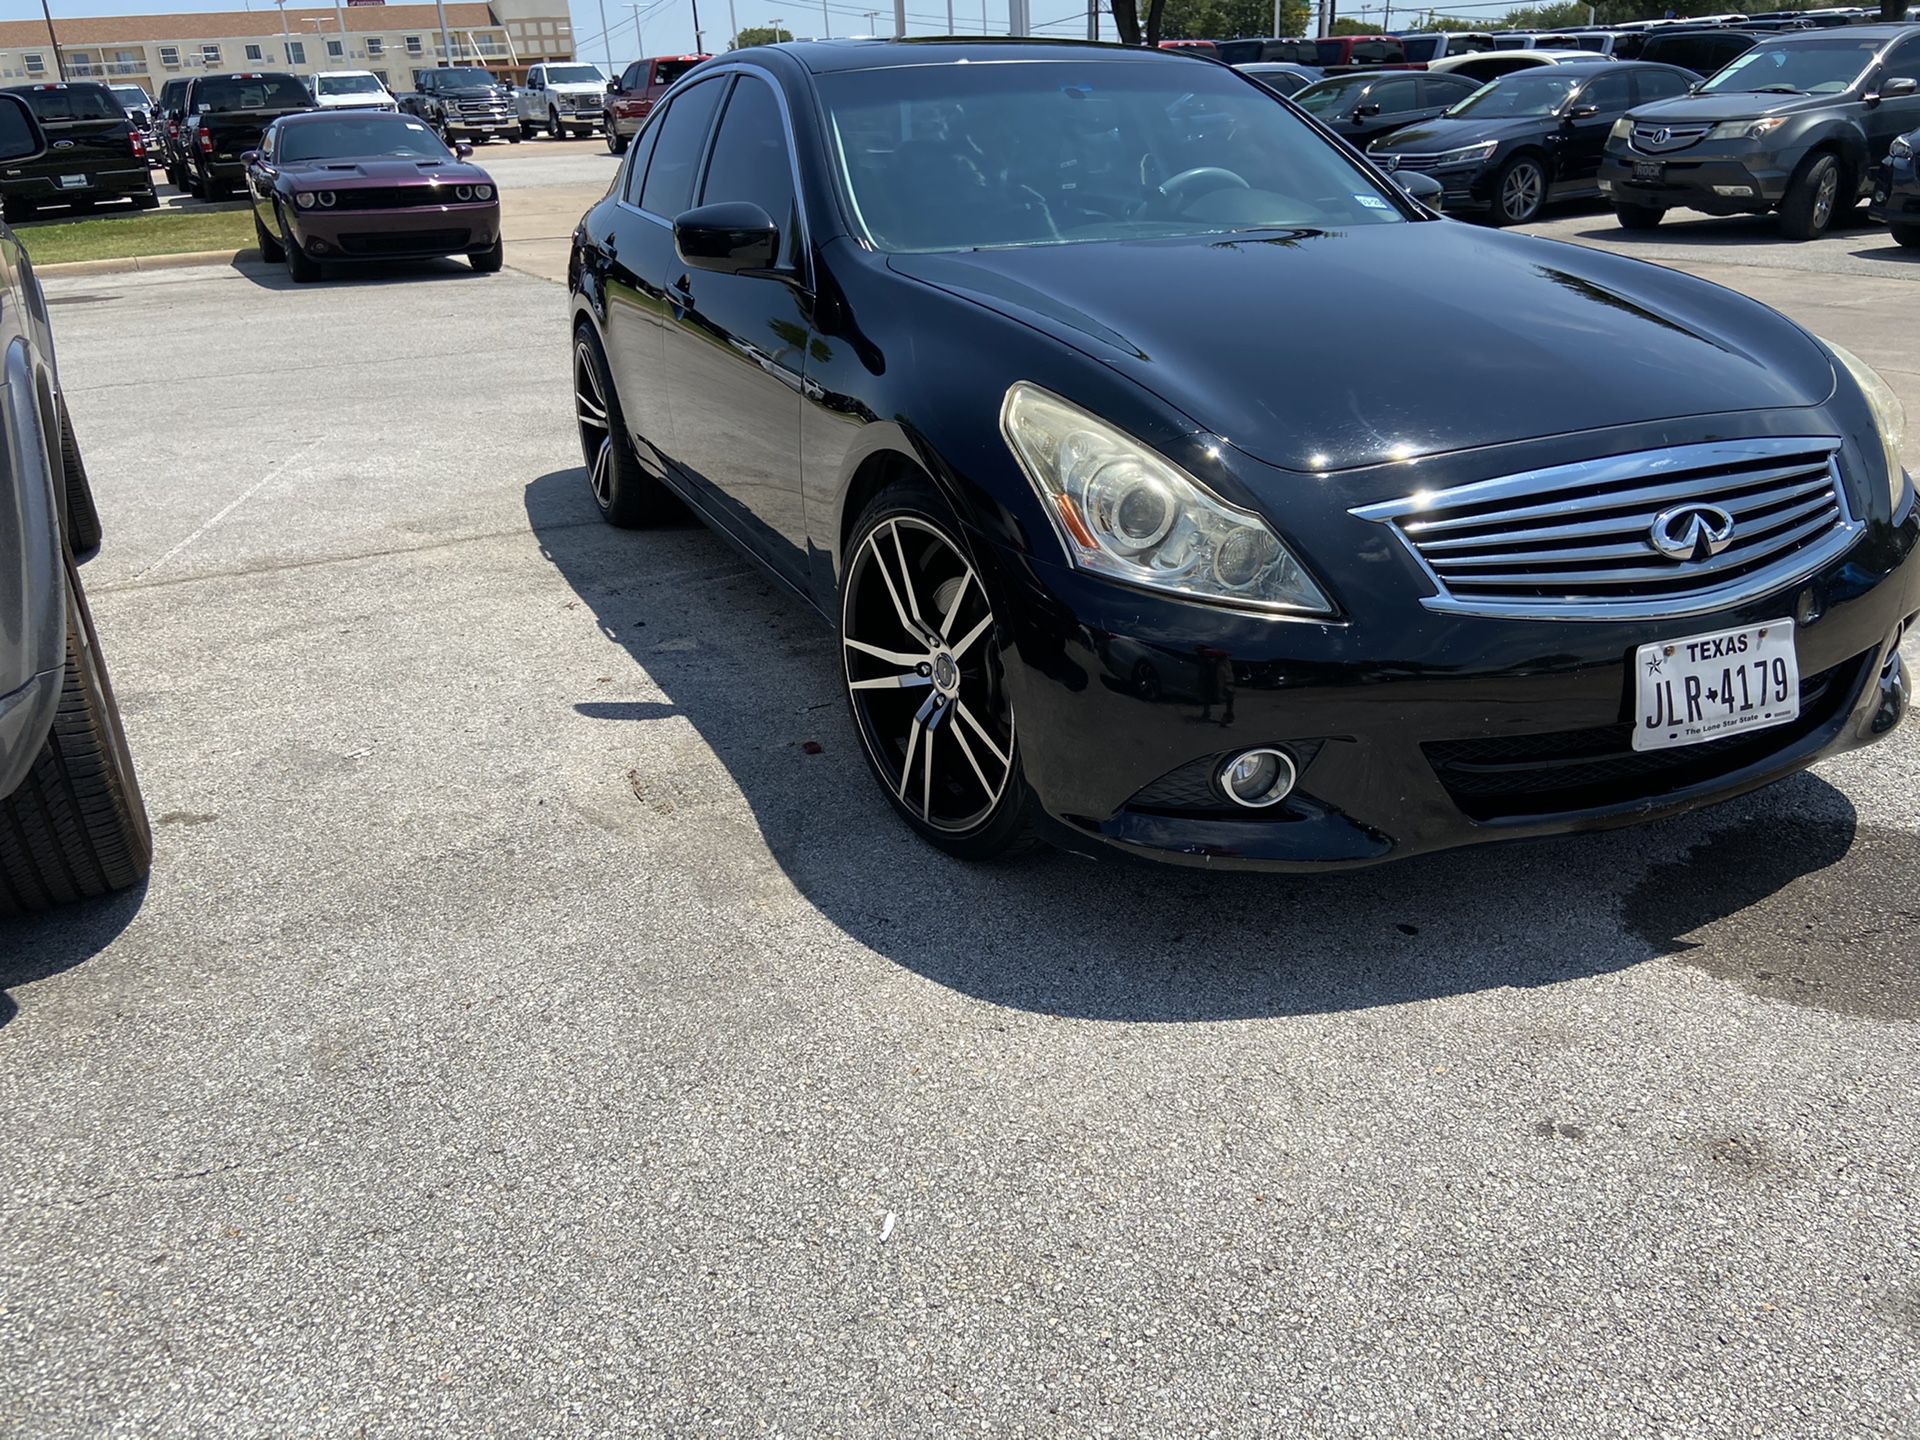 G37 2010 one owner